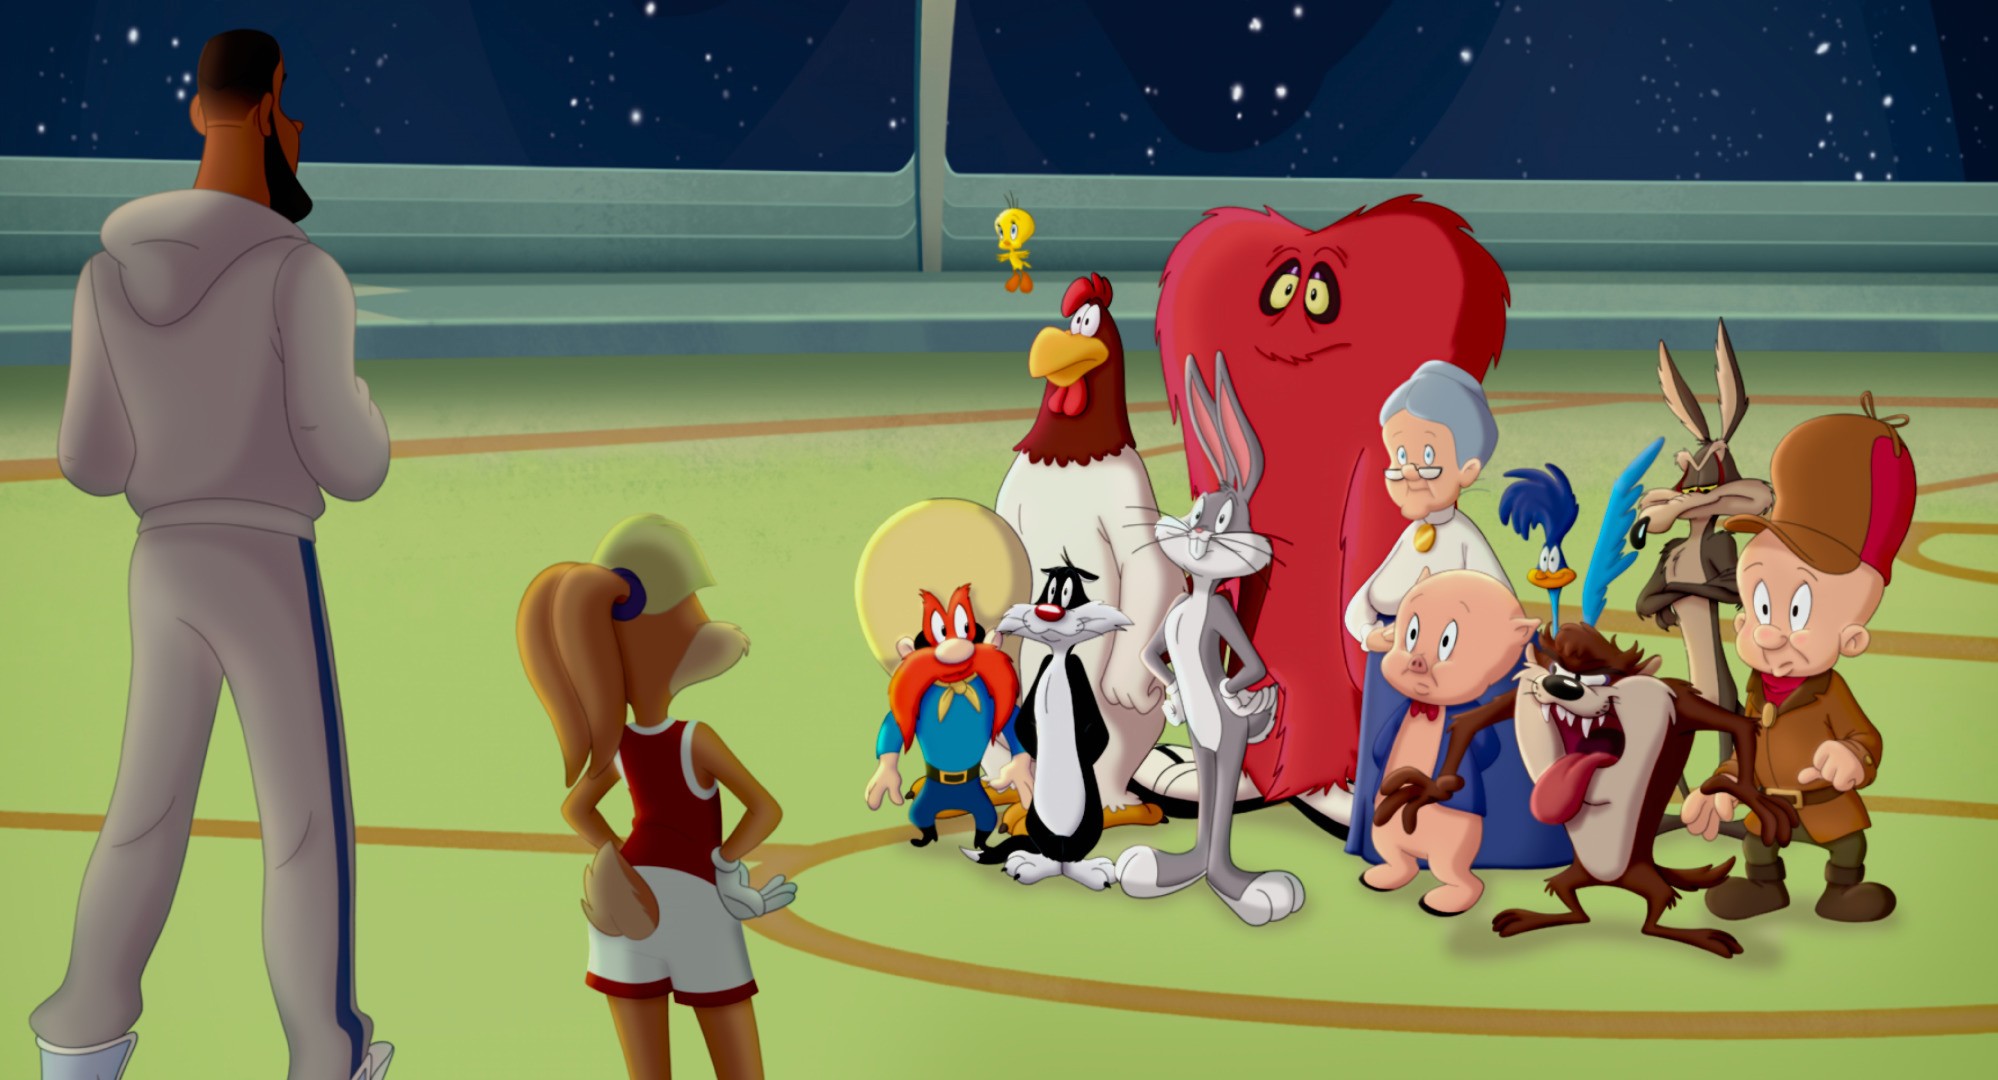 Dream come true': Montreal 2D effects artist among animators on 'Space Jam:  A New Legacy' - Montreal 